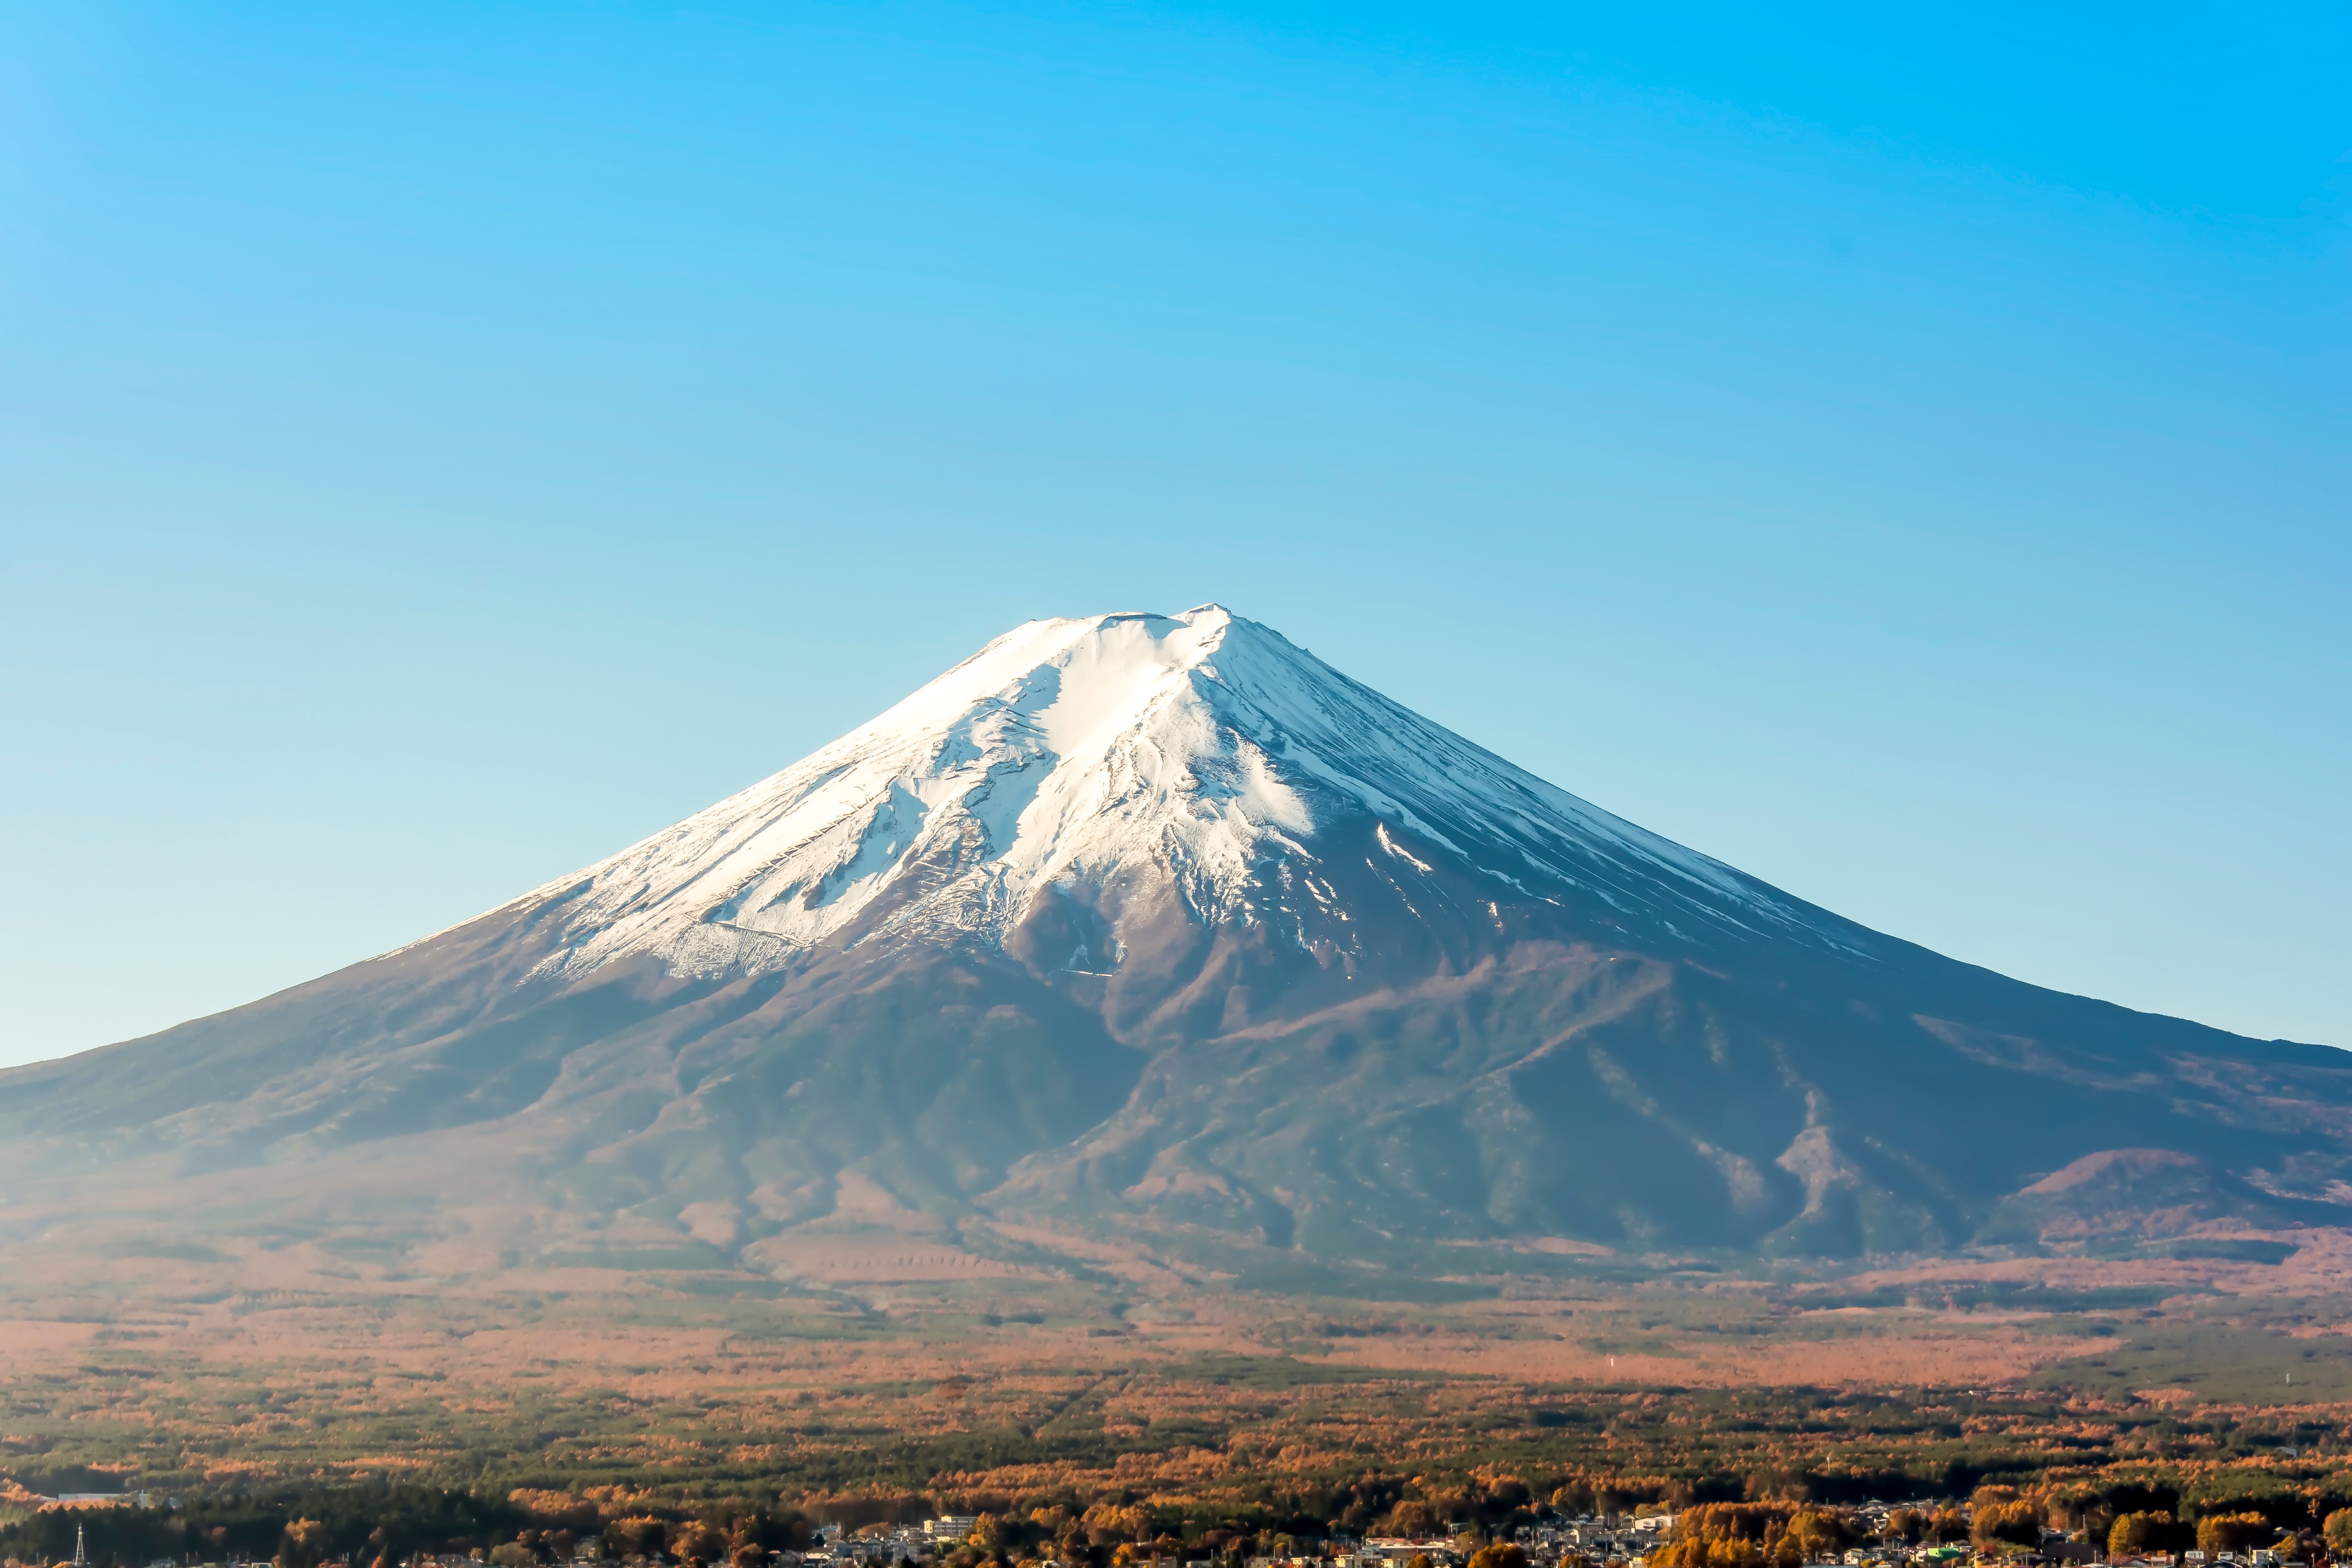 Japan's Mt. Fuji is an active volcano about 100 kilometres southwest of Tokyo. (Kriangkrai Thitimakorn—Getty Images)